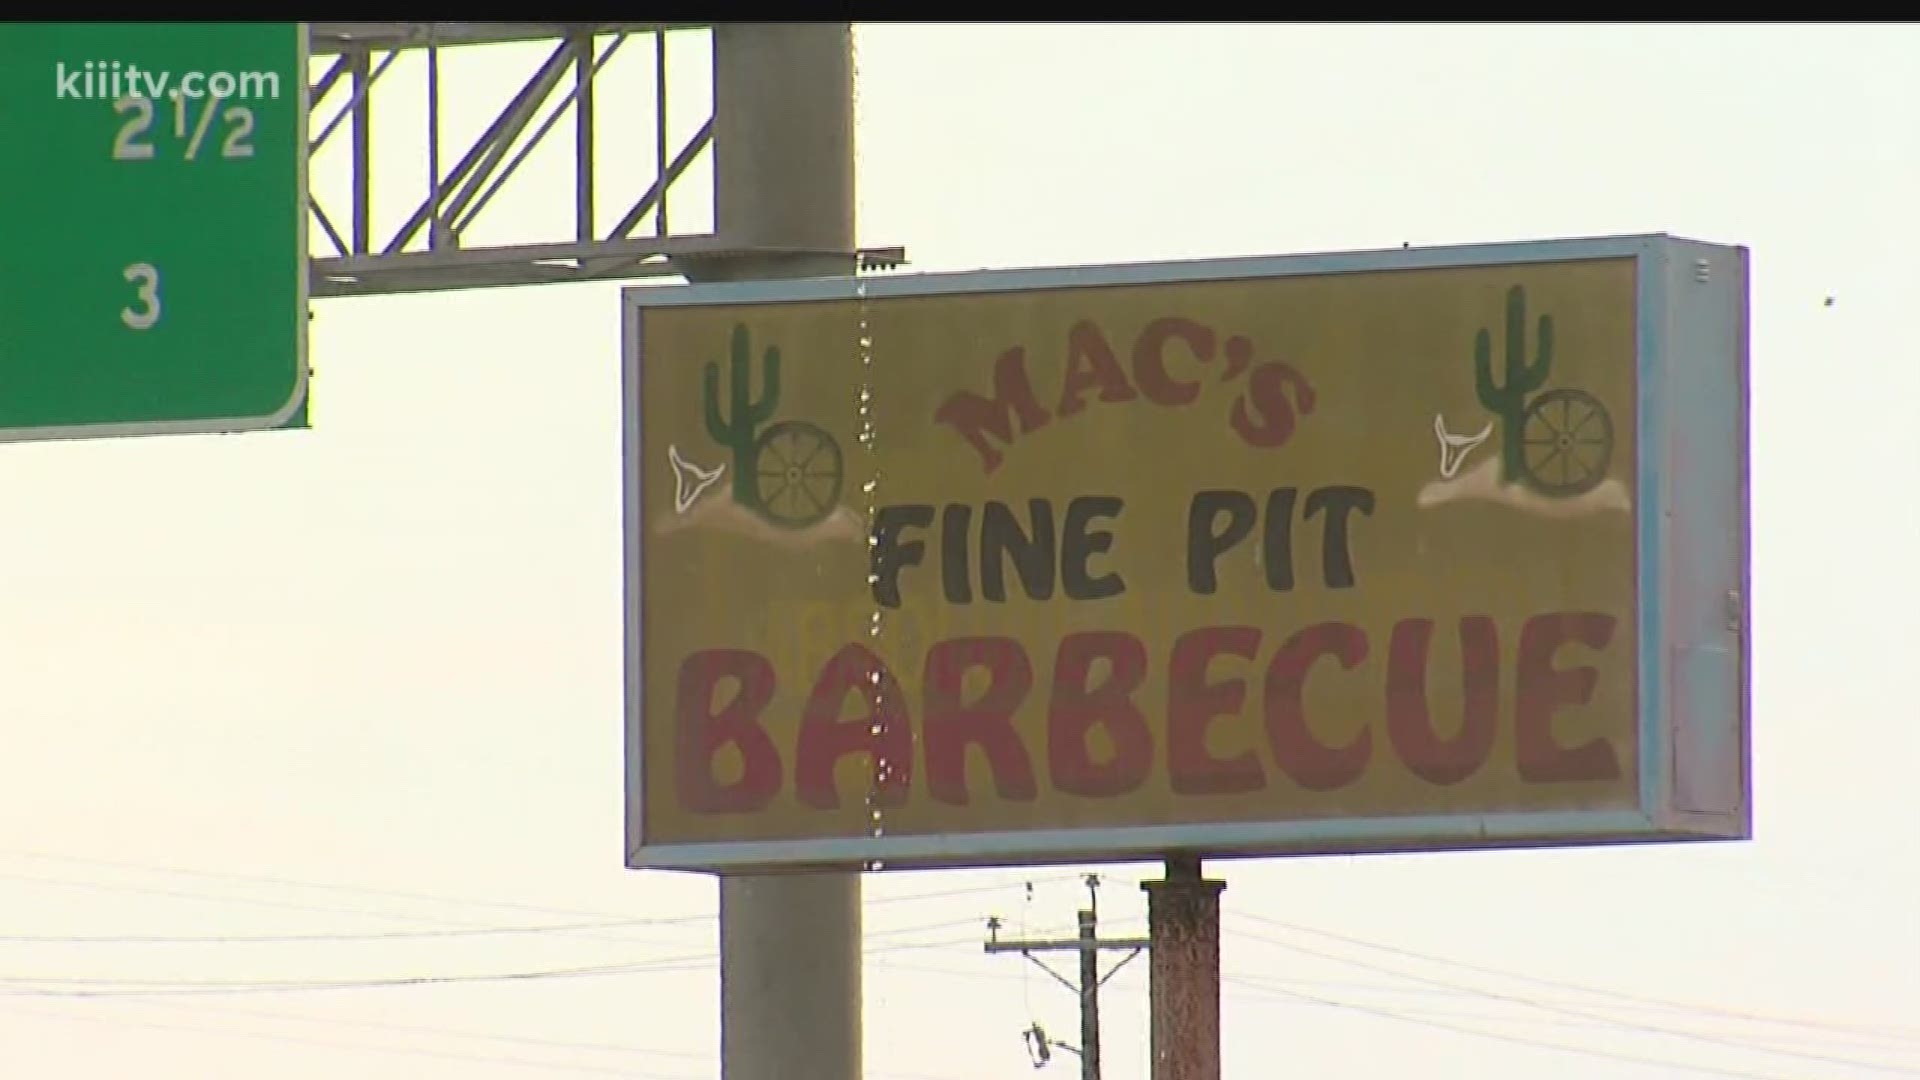 Mac's Barbecue in Gregory plans to rebuild